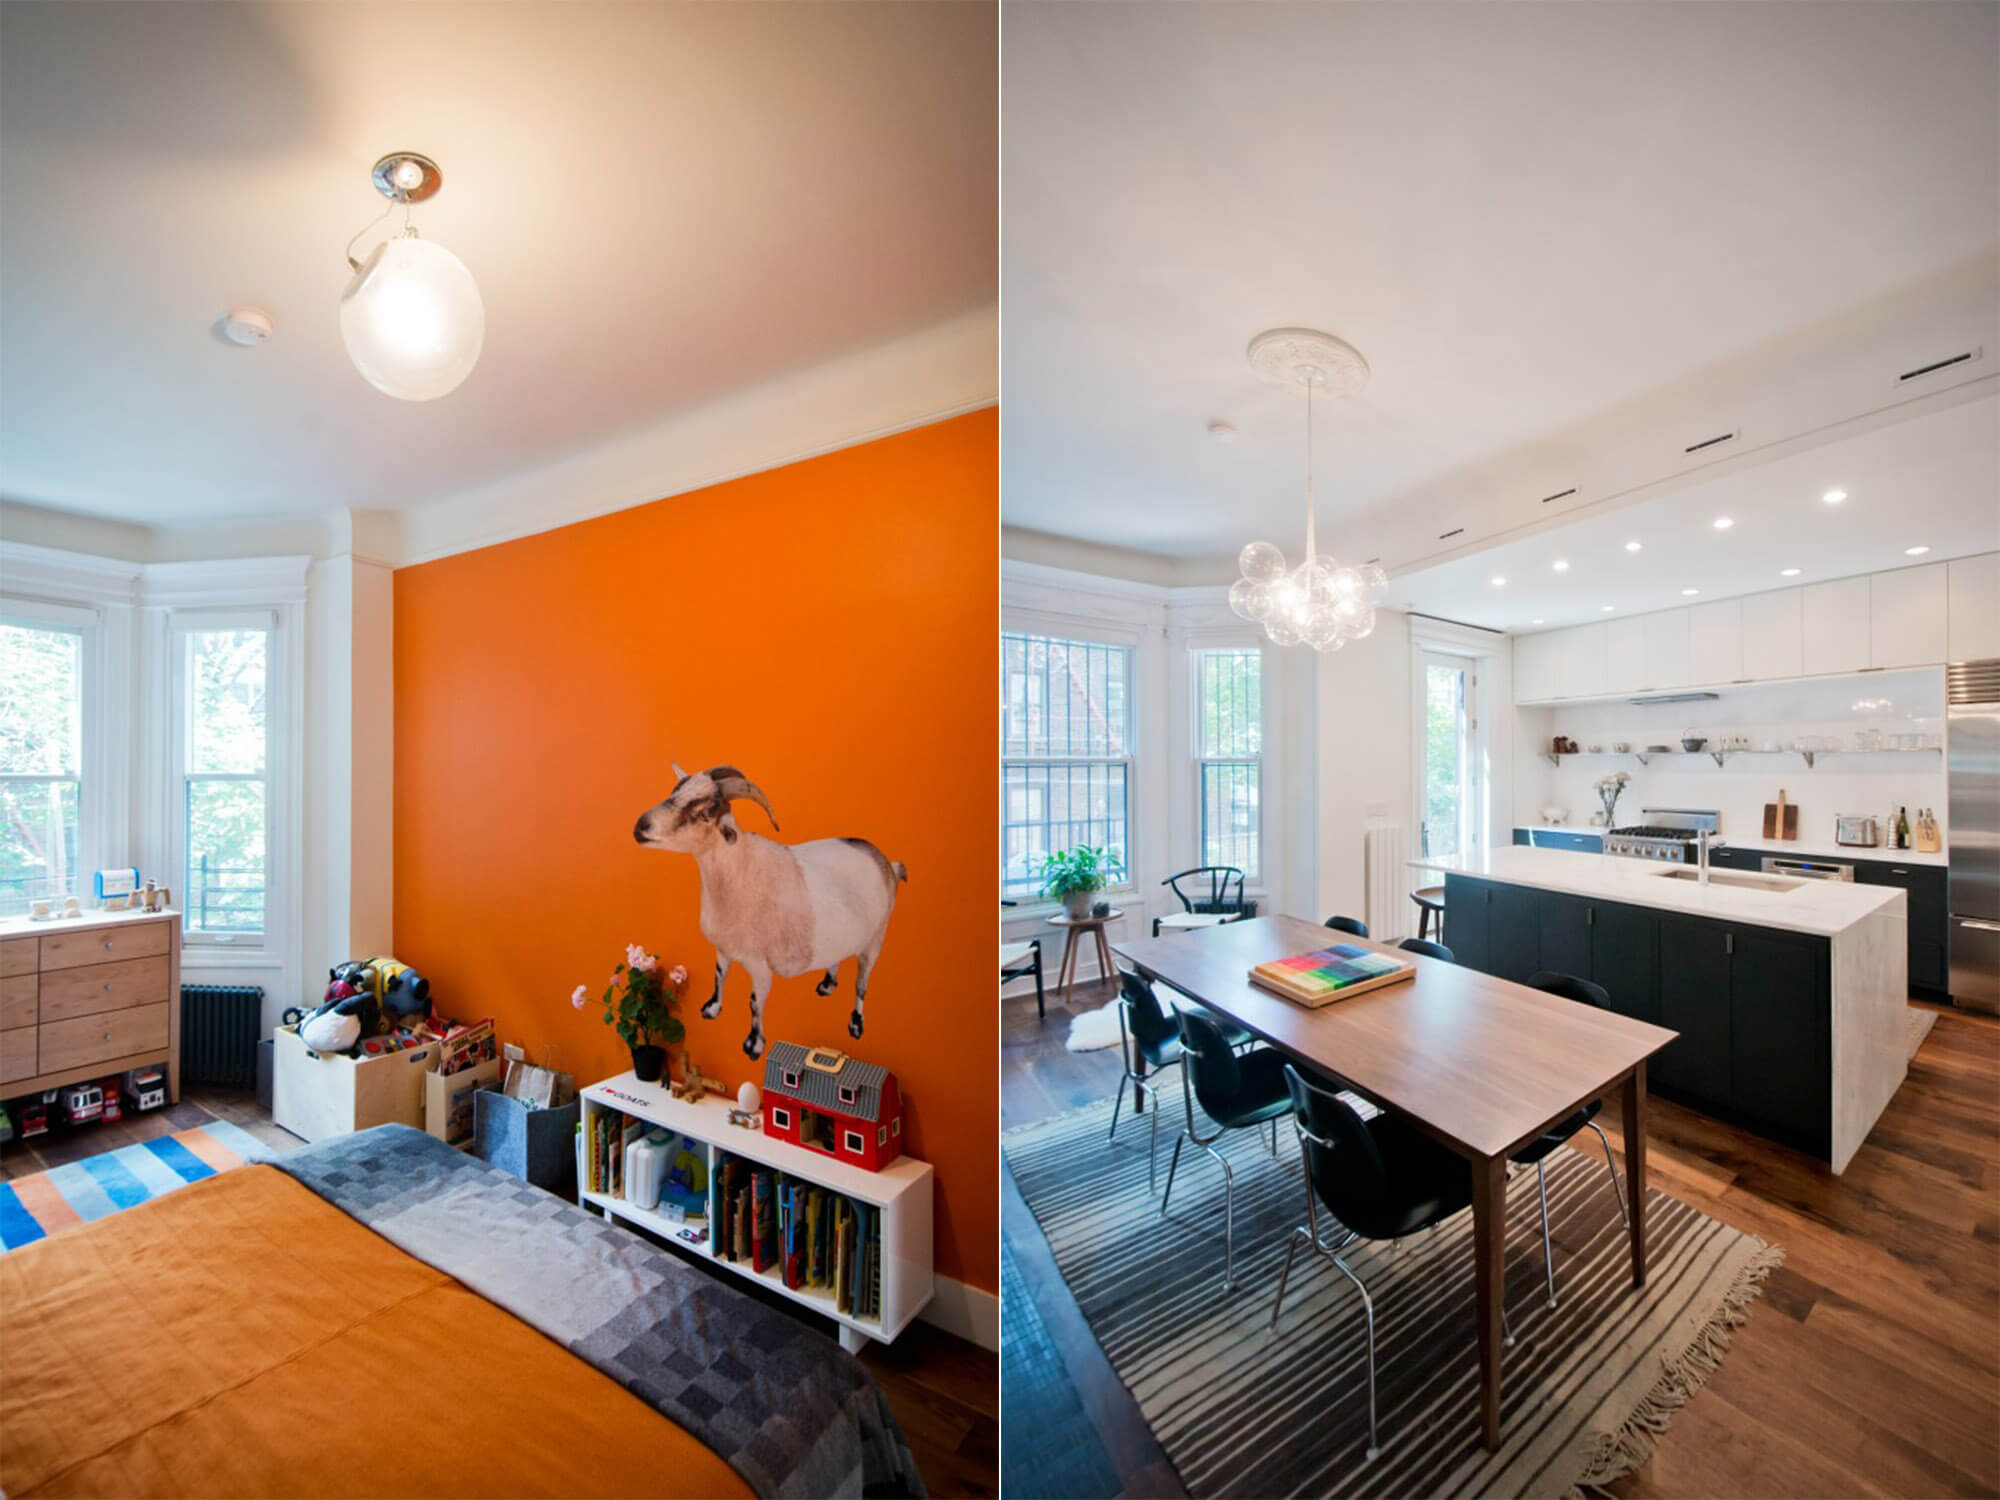   Kids Bedroom   (left) &nbsp; - friendly goat complemented with orange paint.   Dining room &nbsp; (right) &nbsp; - dining room area adjacent to the kitchen with tons of natural light.  